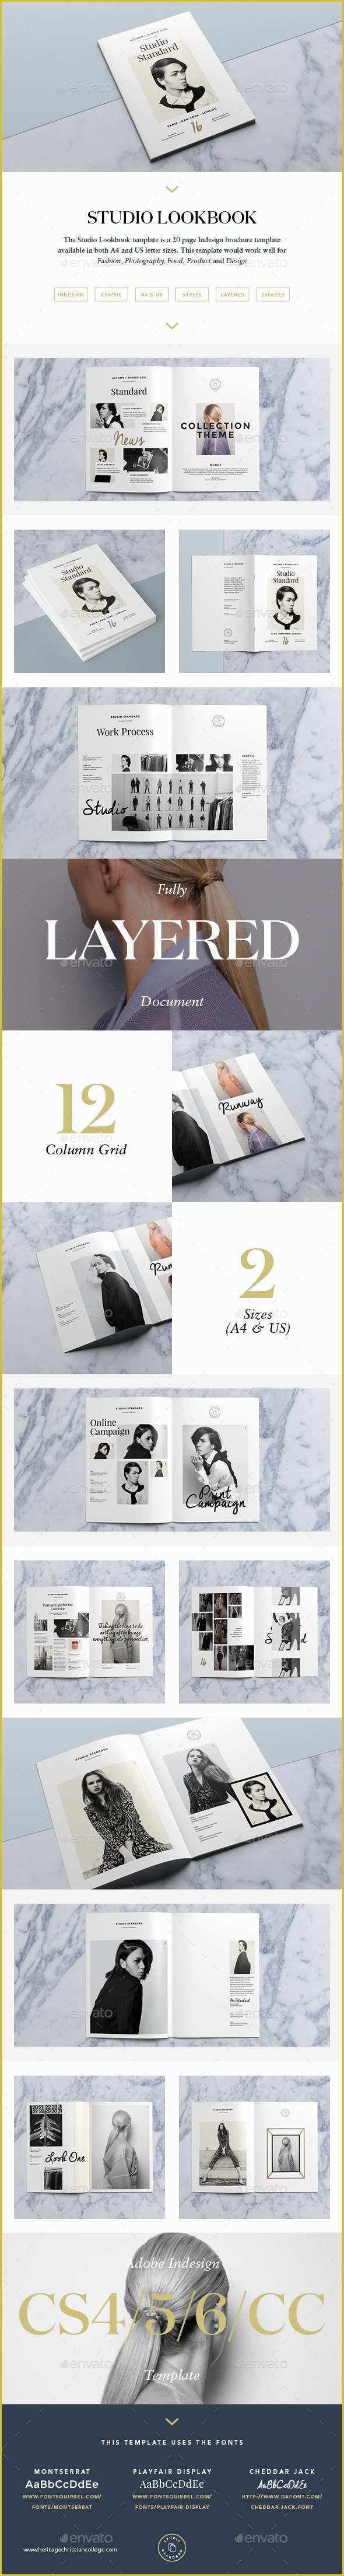 Lookbook Template Free Of Free Indesign Lookbook Template Dondrup